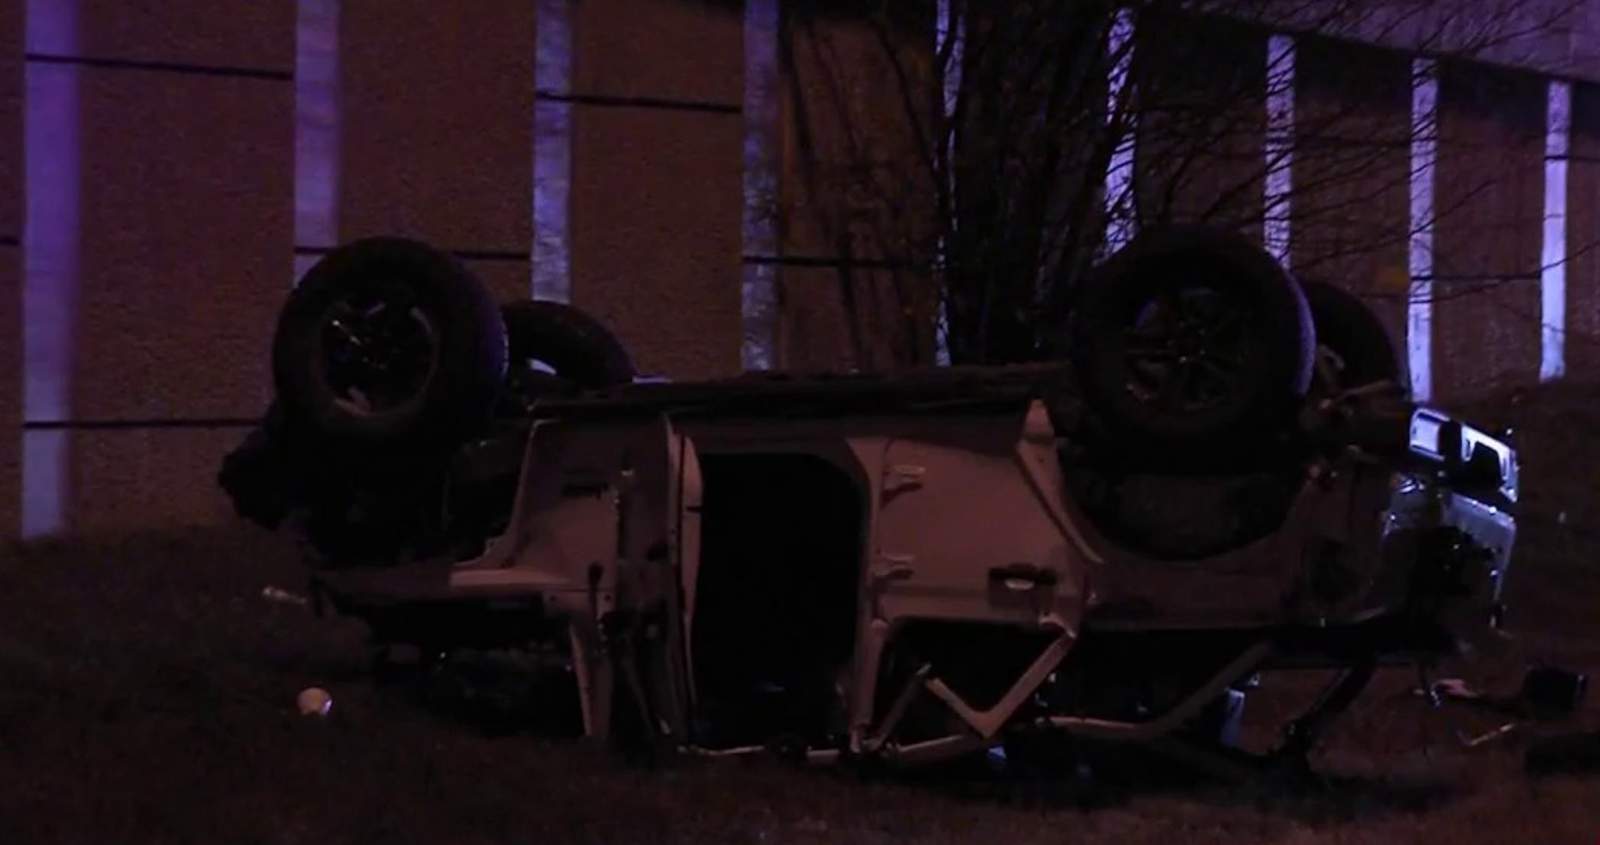 Man in critical condition after rollover crash on East Side, police say